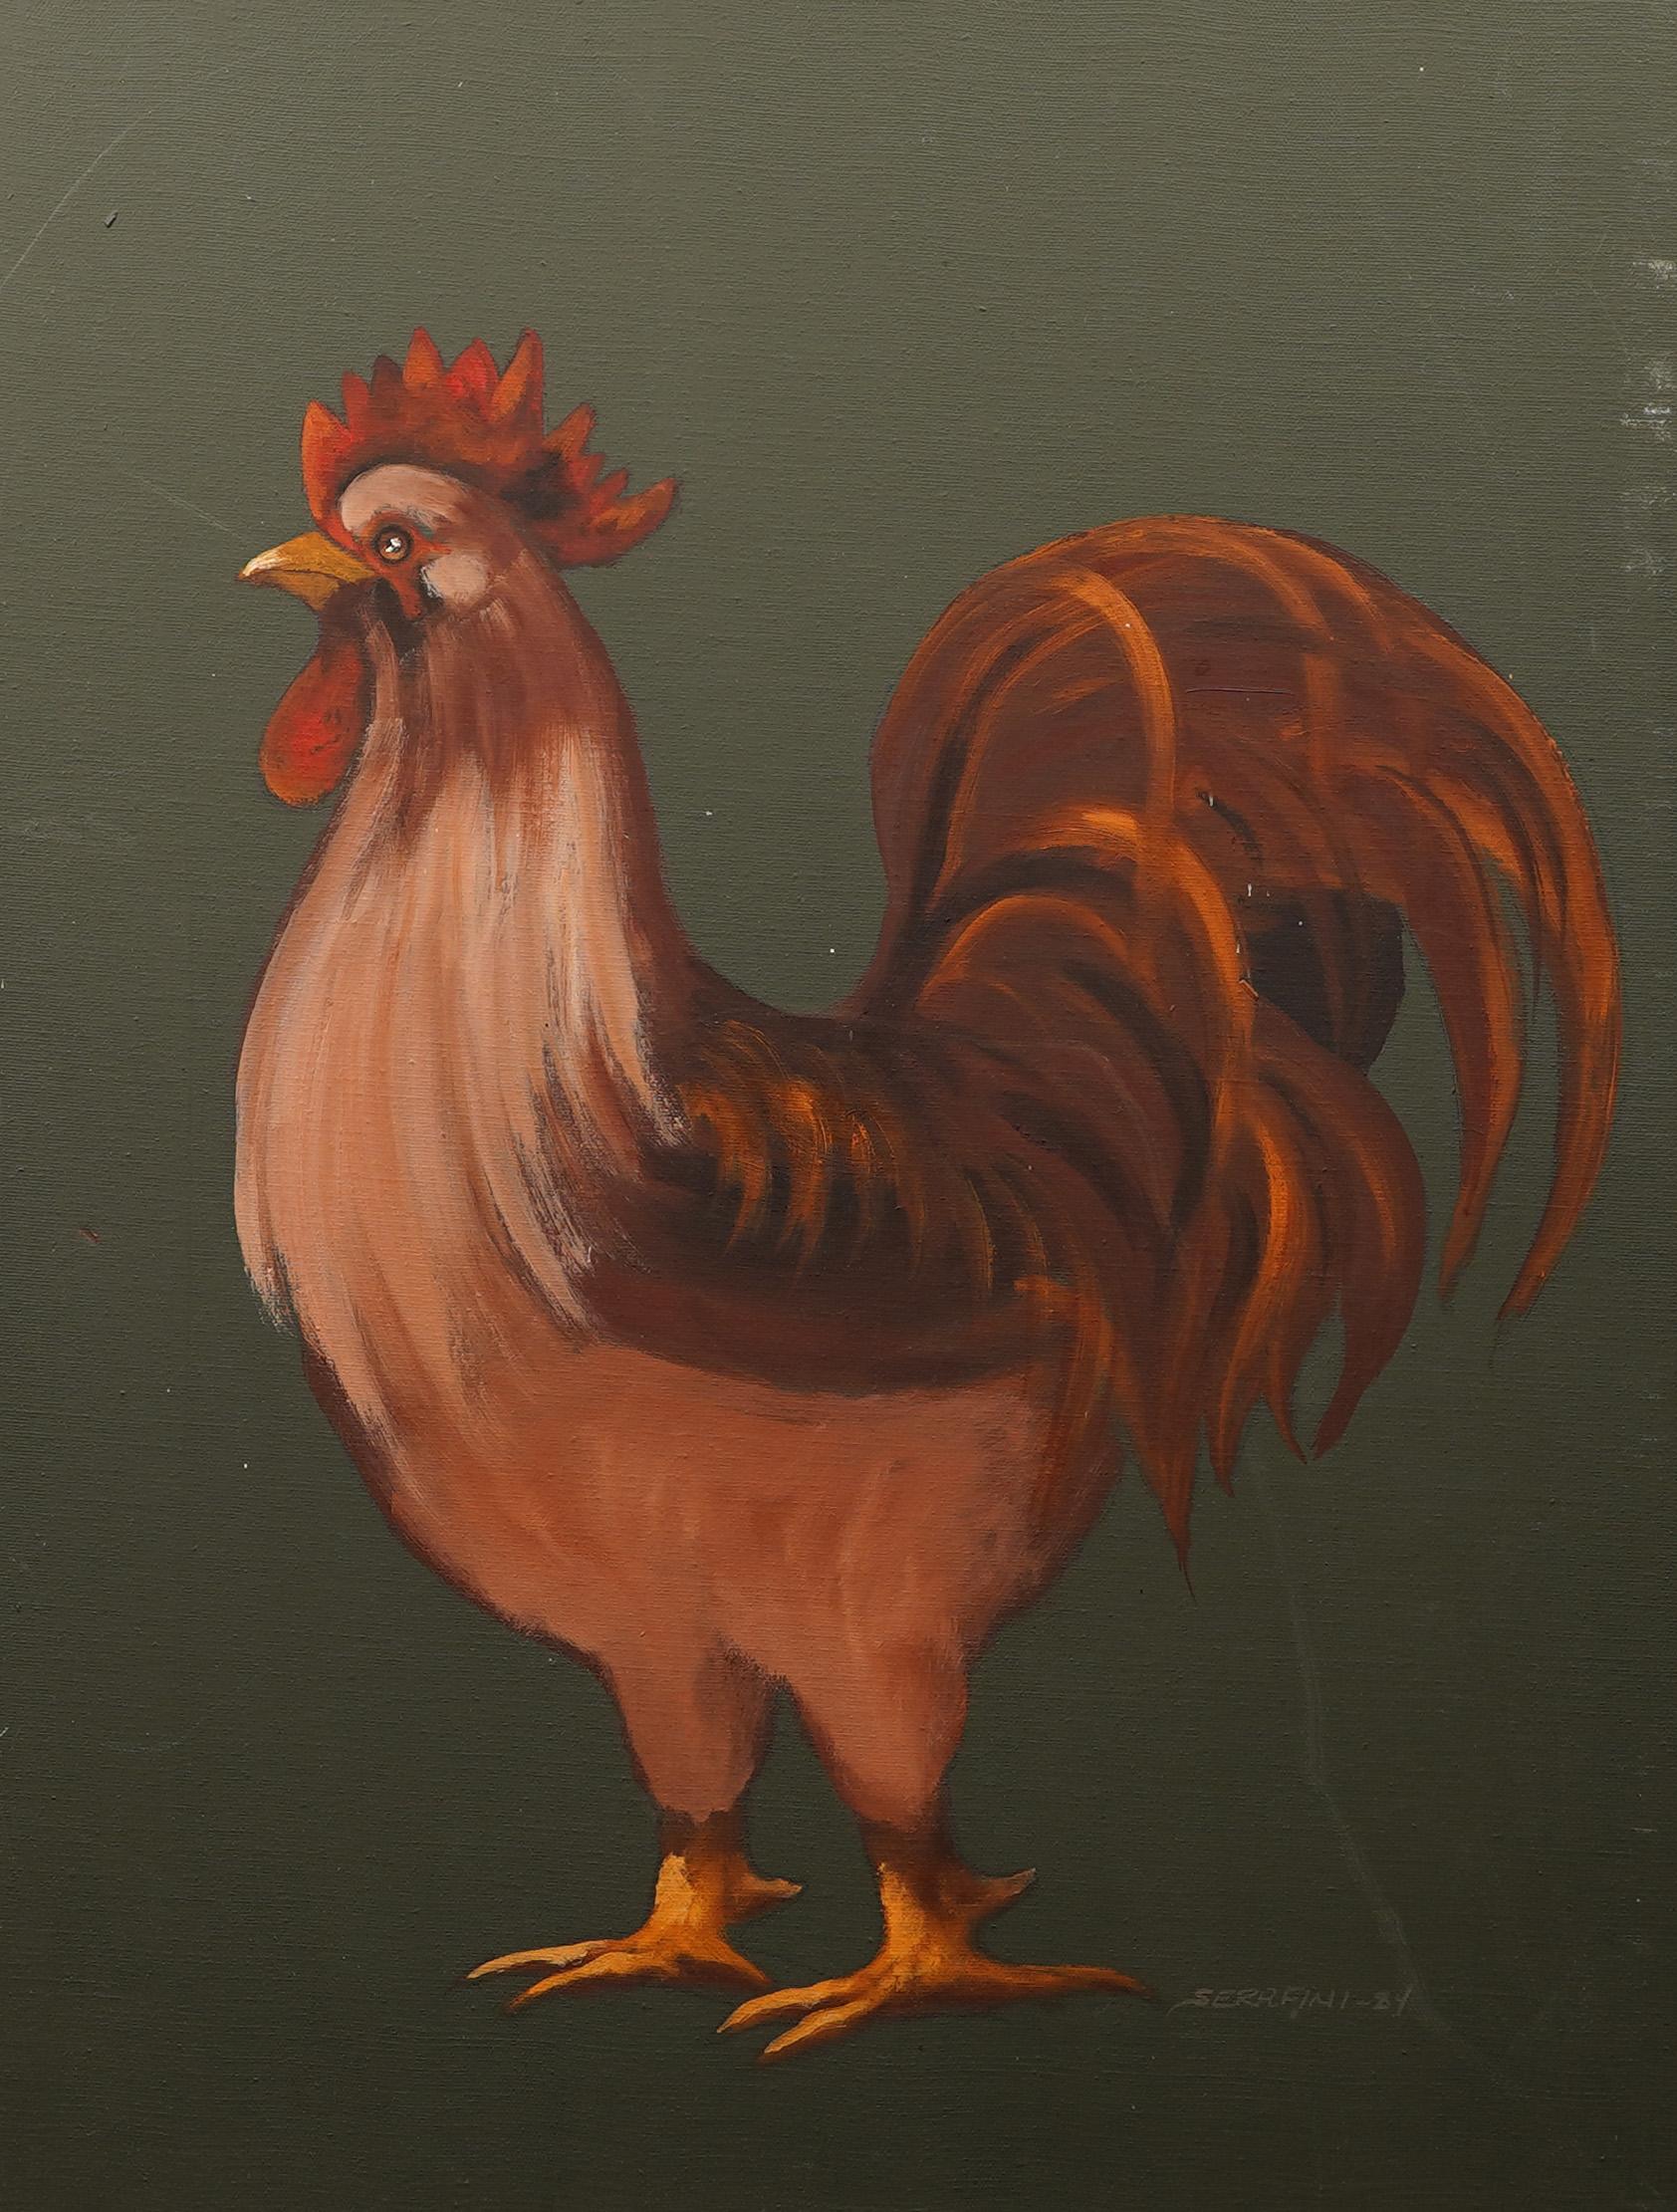 Vintage Country Chic Americana Folk Art Rooster Portrait Original Oil Painting For Sale 1